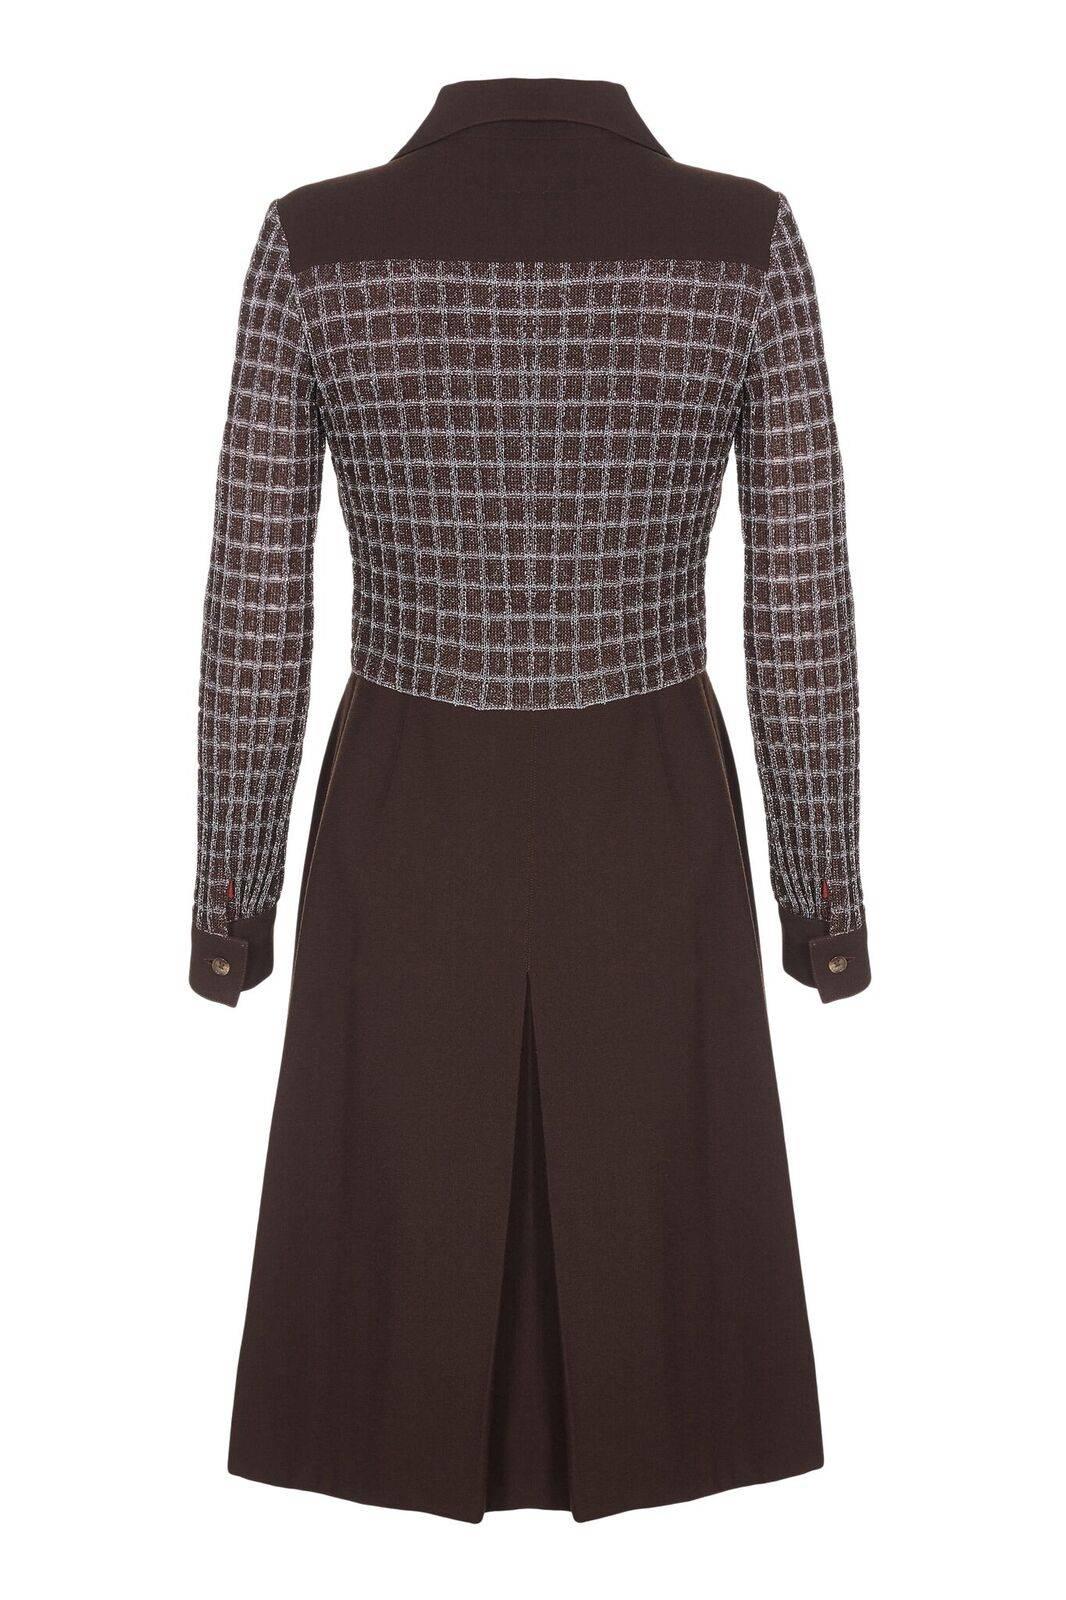 This stylish 1970s Pisanti chocolate brown crepe dress with metallic check design has a host of stylish features. The warm, deep brown fabric of the skirt is complemented wonderfully by the metallic ribbed knitwear on the bodice and sleeves. The